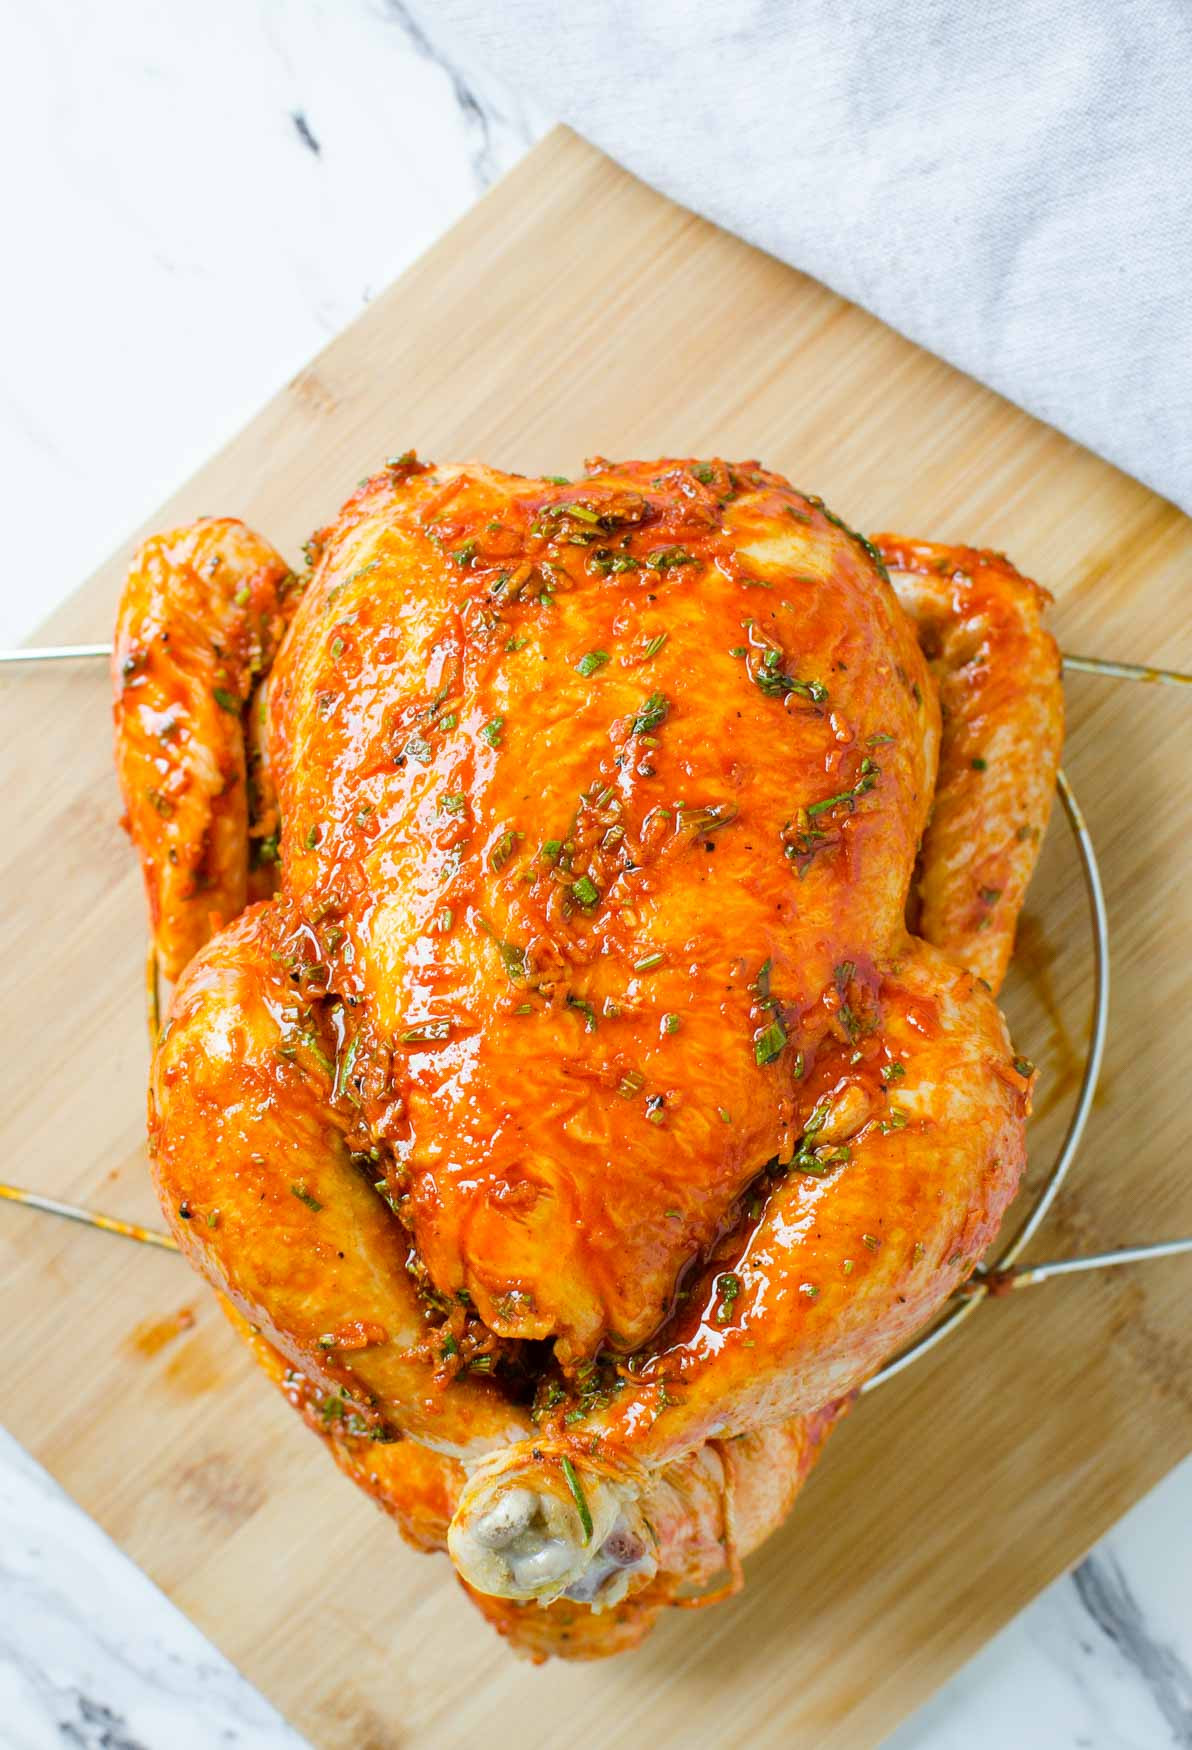 Instapot Whole Chicken
 Easy Instant Pot Whole Chicken With Delicious Gravy in 30